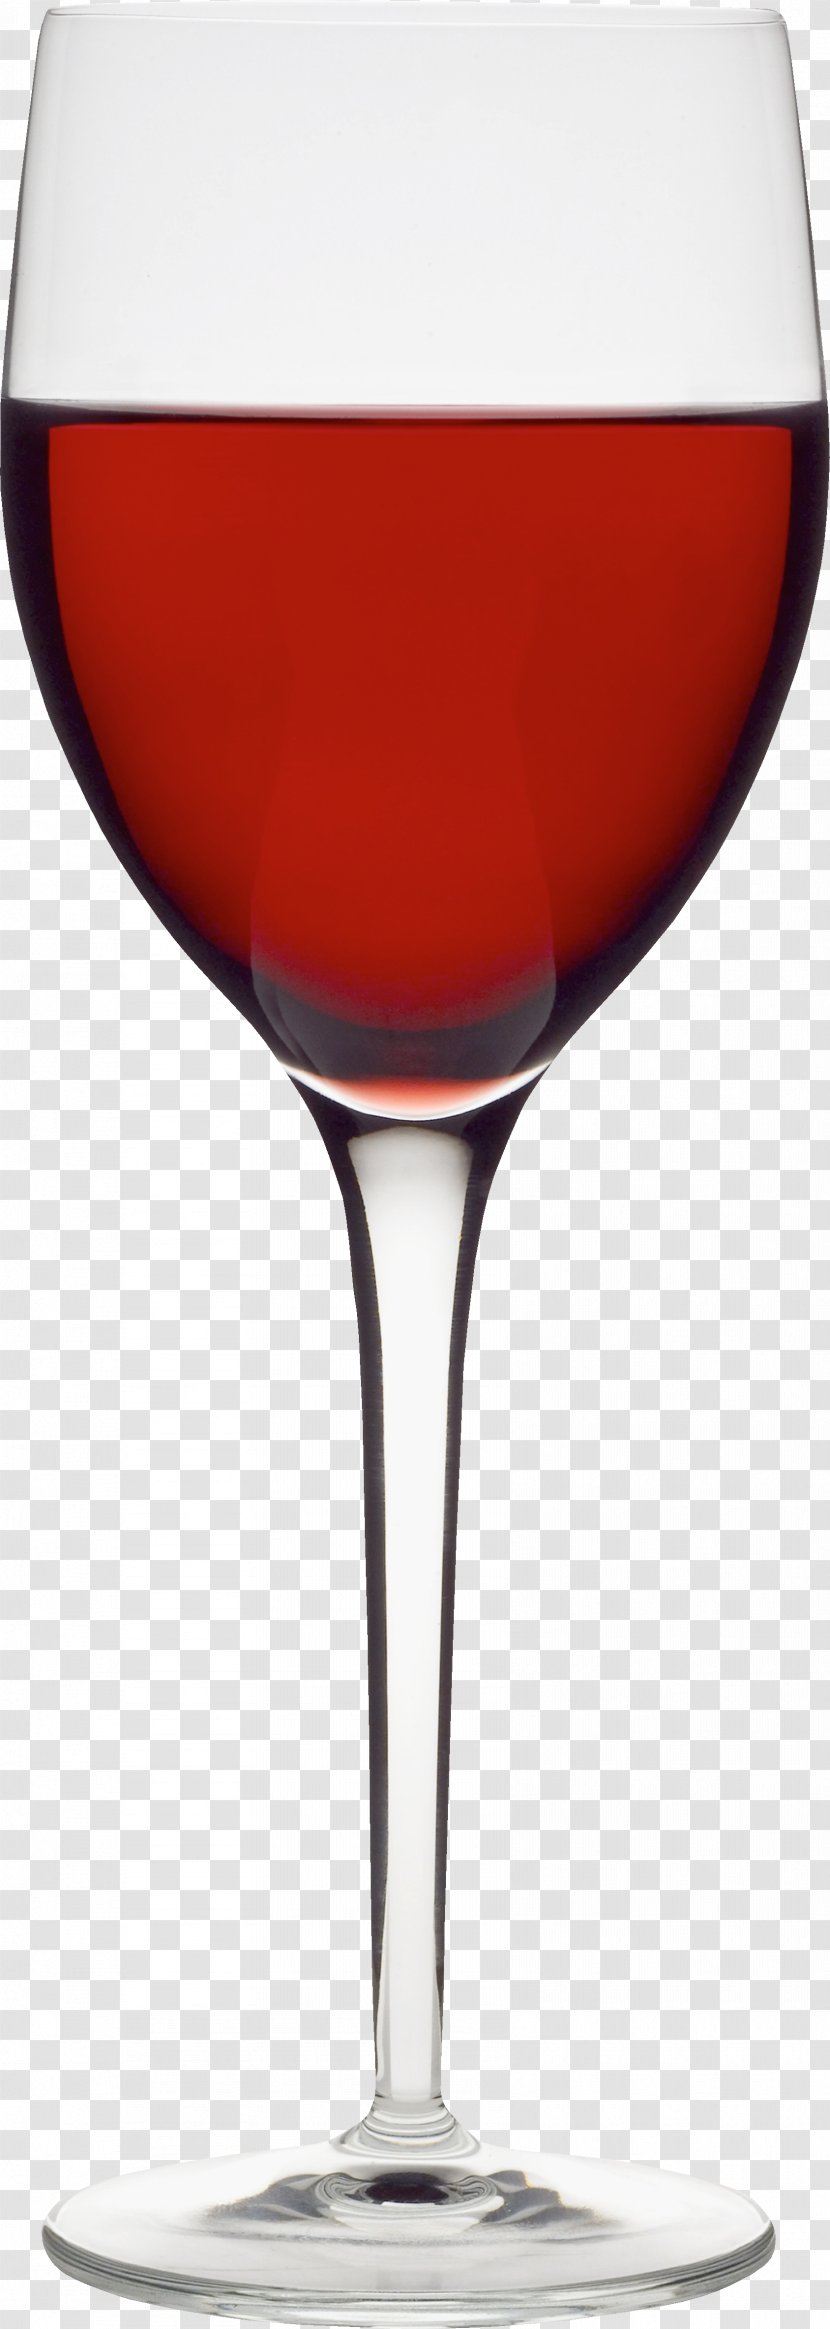 Red Wine Glass Cocktail Champagne - Beer Glasses - Image Transparent PNG